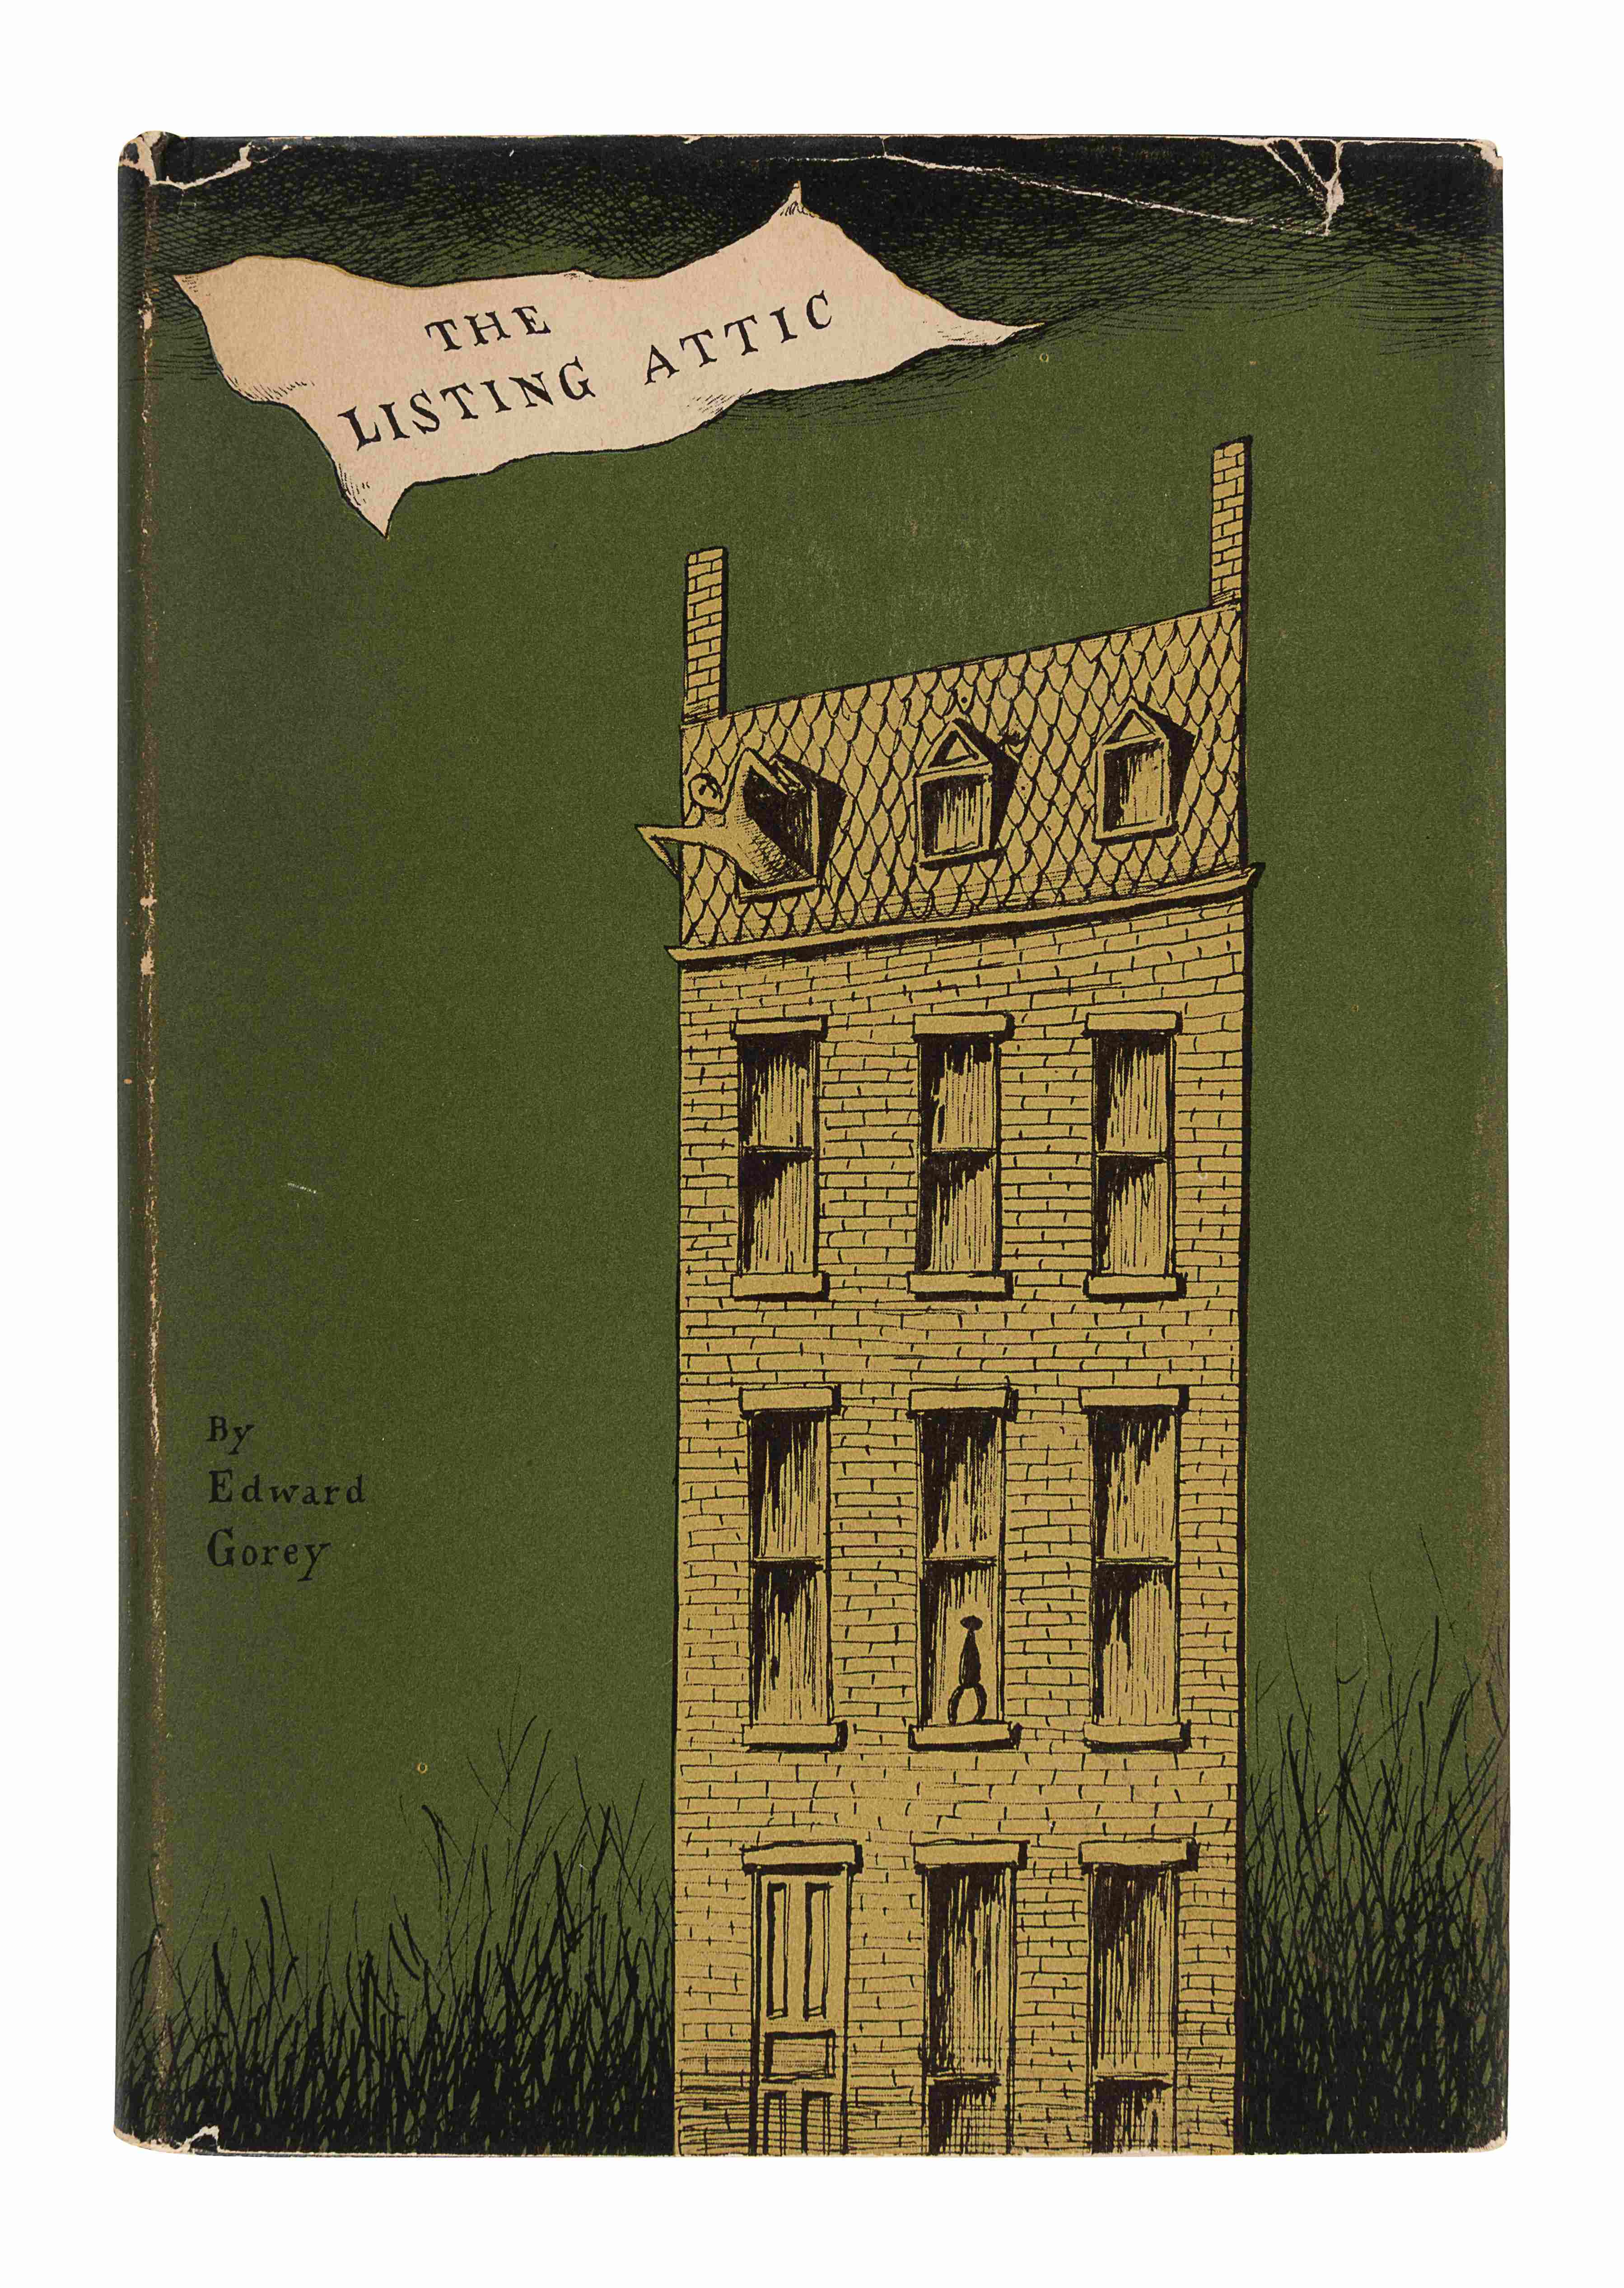 GOREY, Edward (1925-2000). The Listing Attic. New York and Boston: Duell, Sloan and Pearce; Little B